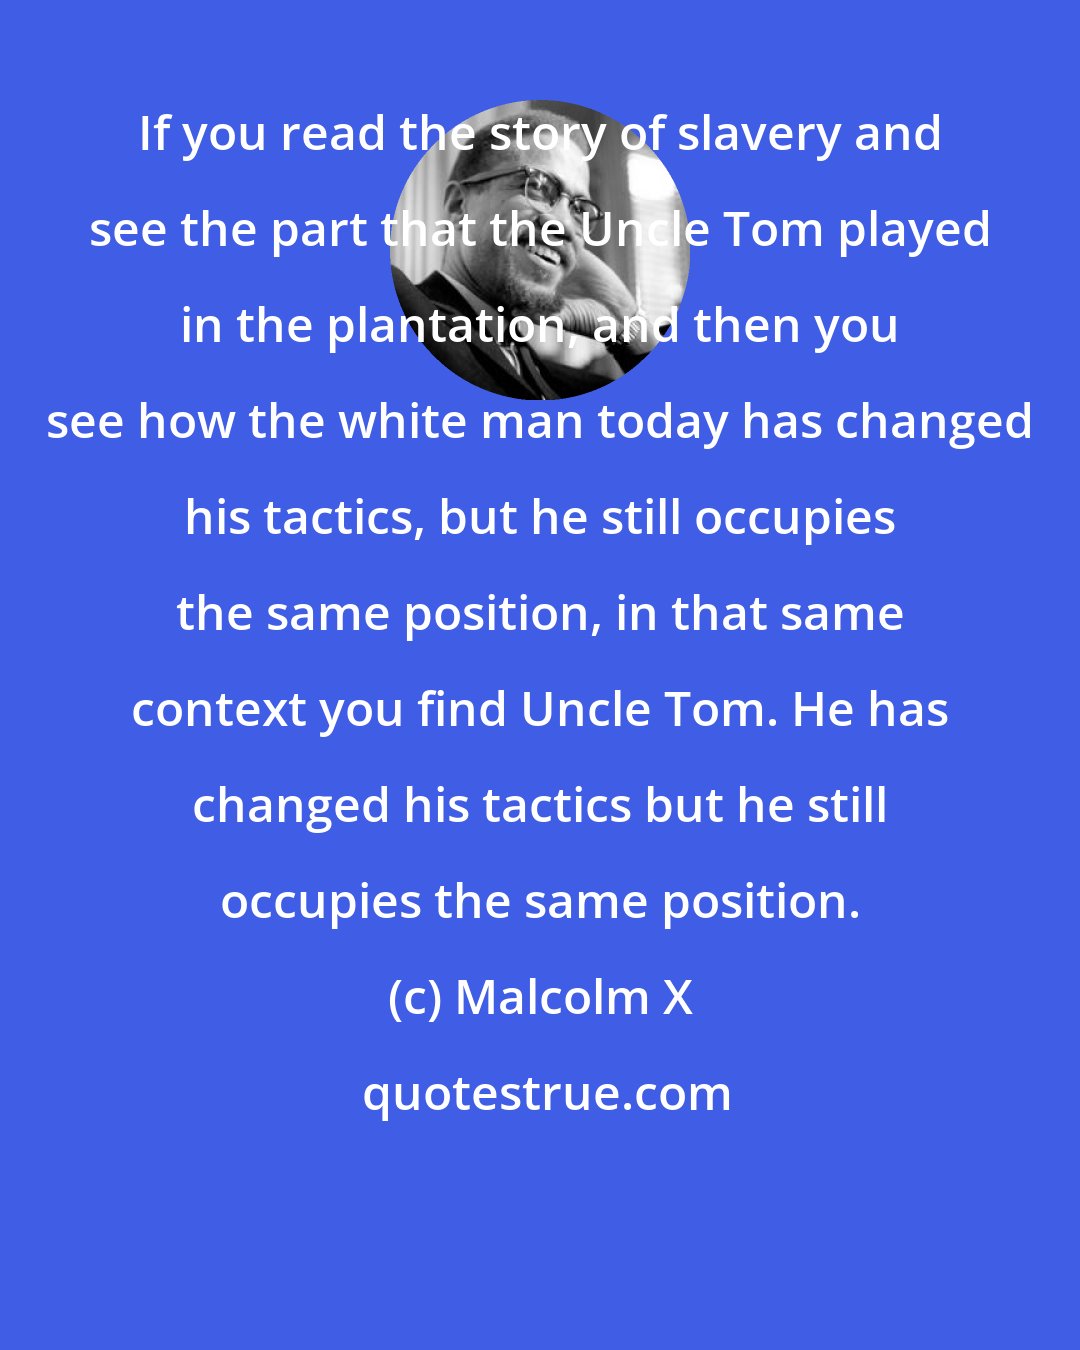 Malcolm X: If you read the story of slavery and see the part that the Uncle Tom played in the plantation, and then you see how the white man today has changed his tactics, but he still occupies the same position, in that same context you find Uncle Tom. He has changed his tactics but he still occupies the same position.